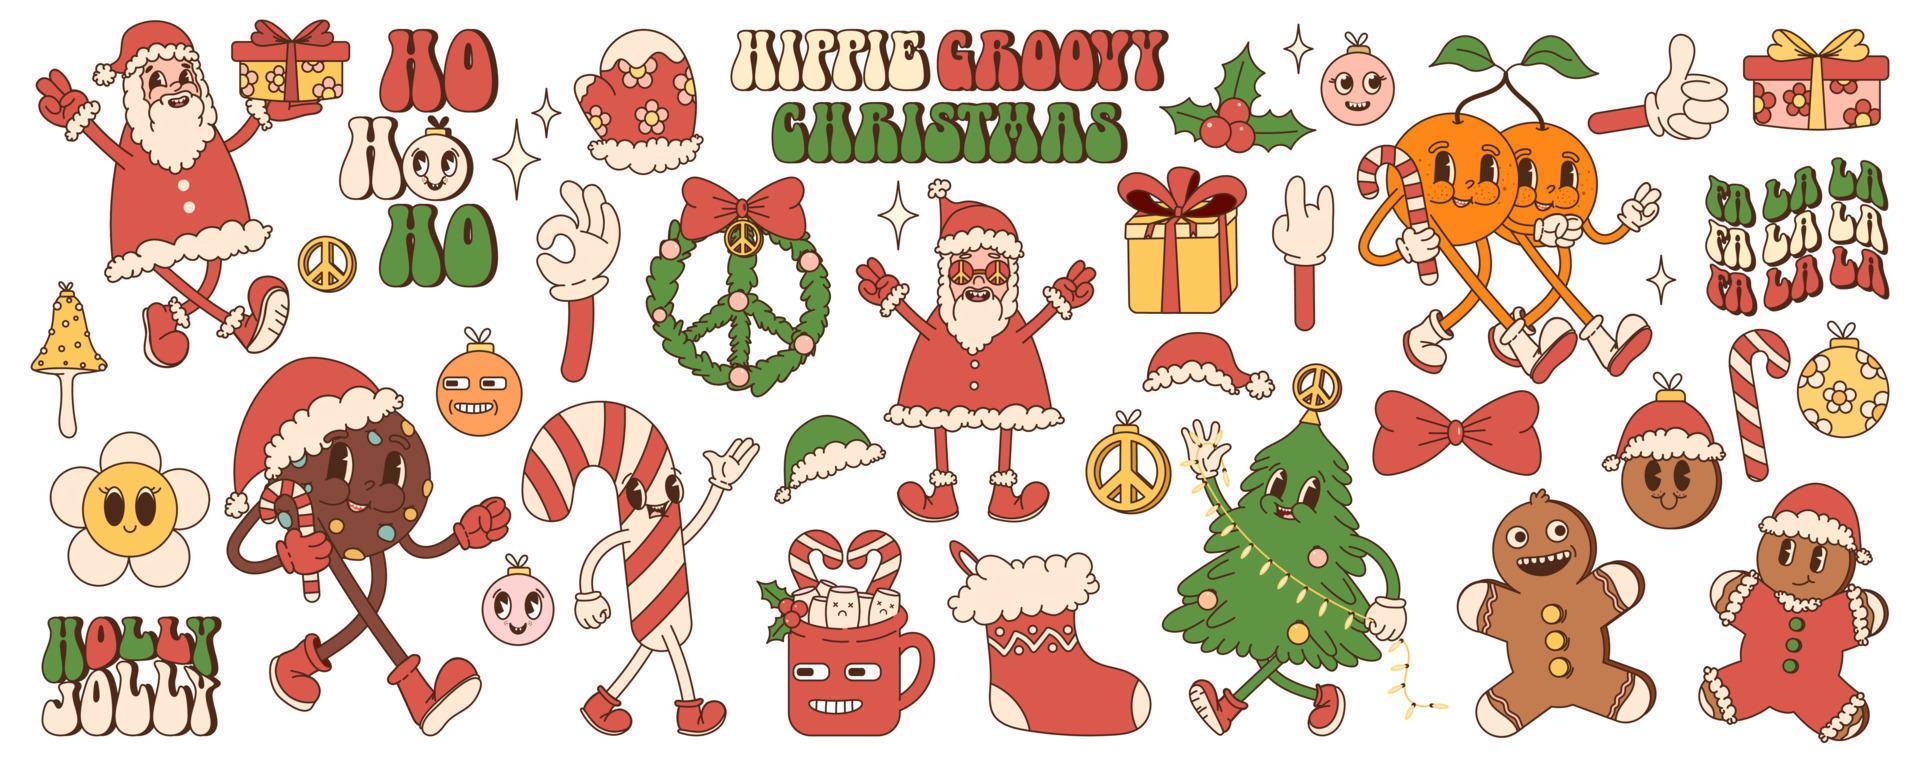 Big sticker pack of retro cartoon characters and elements. Merry Christmas and Happy New year in trendy groovy hippie style. vector